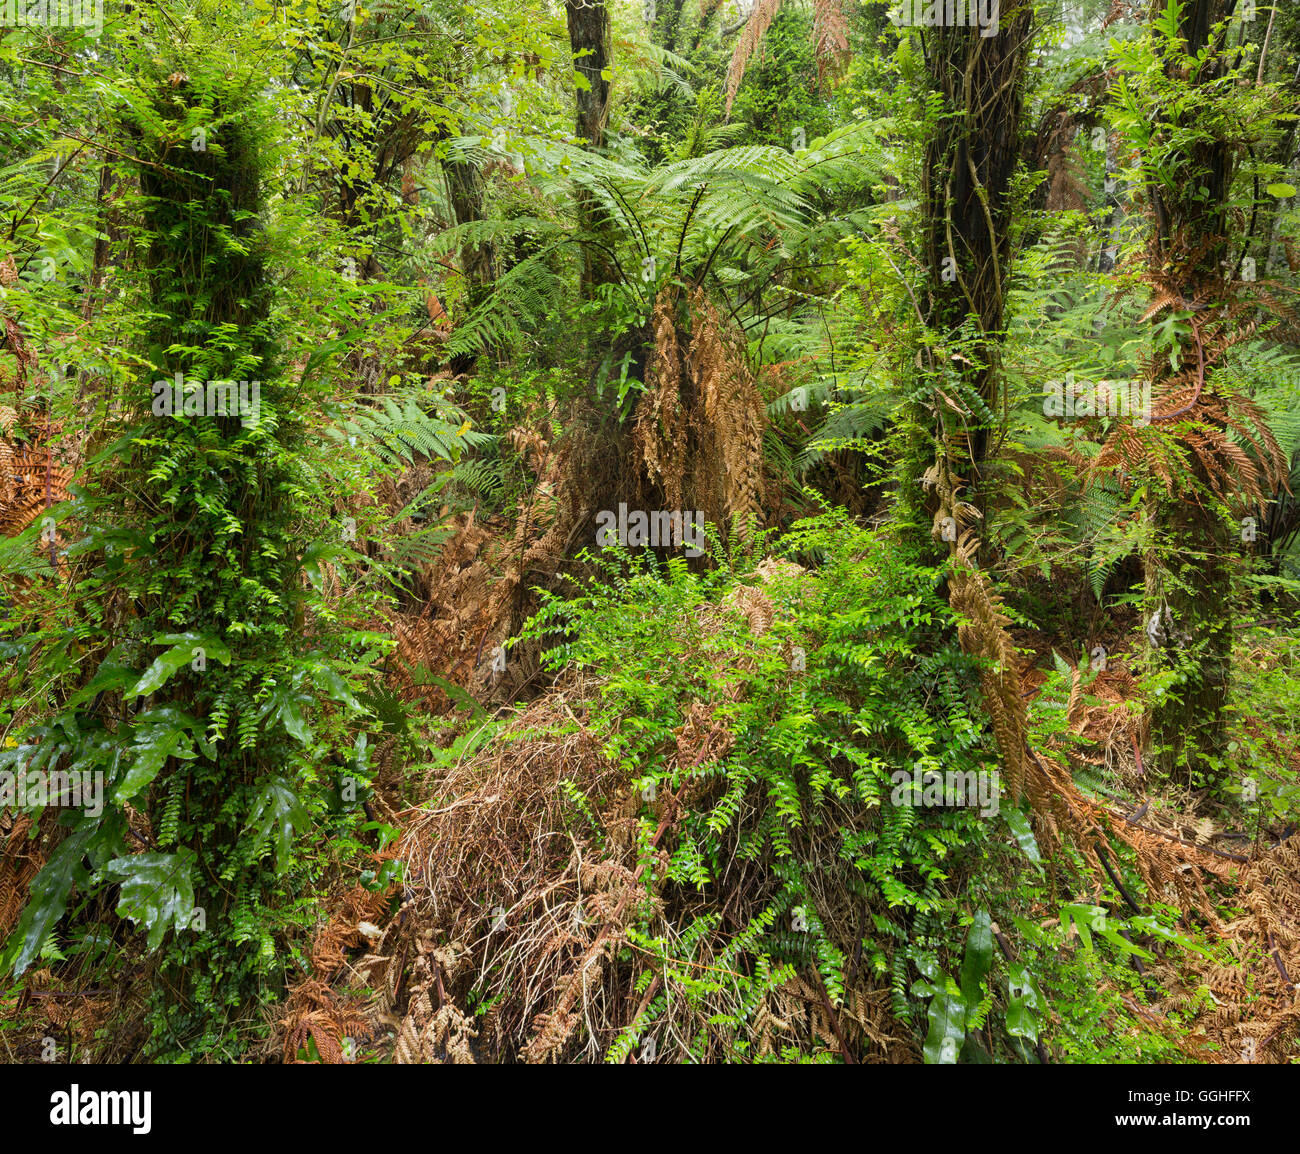 Papatowai Top Track, Forest and ferns, Otago, South Island, New Zealand Stock Photo